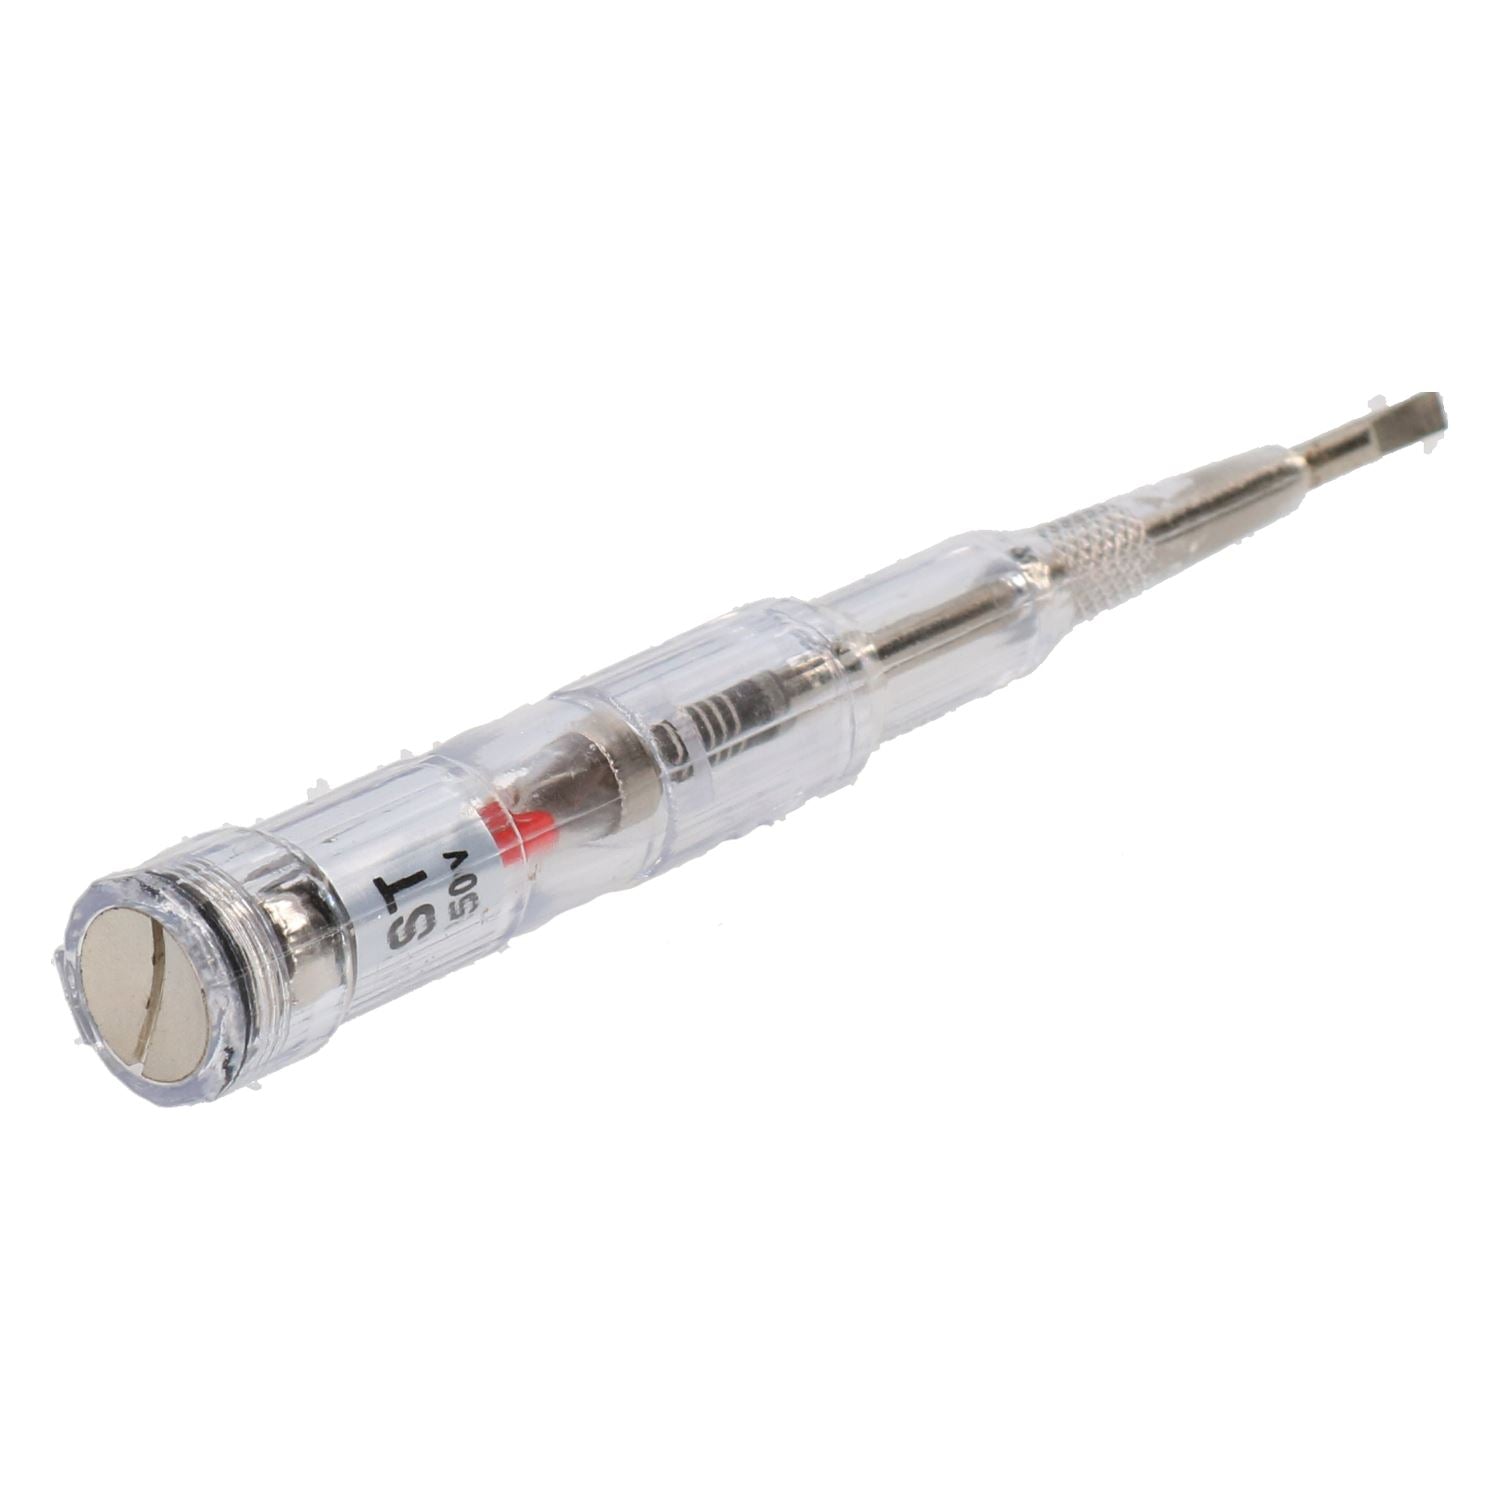 135mm Mains LED Electrical Voltage Tester Insulated Screwdriver 70 - 600 Volts